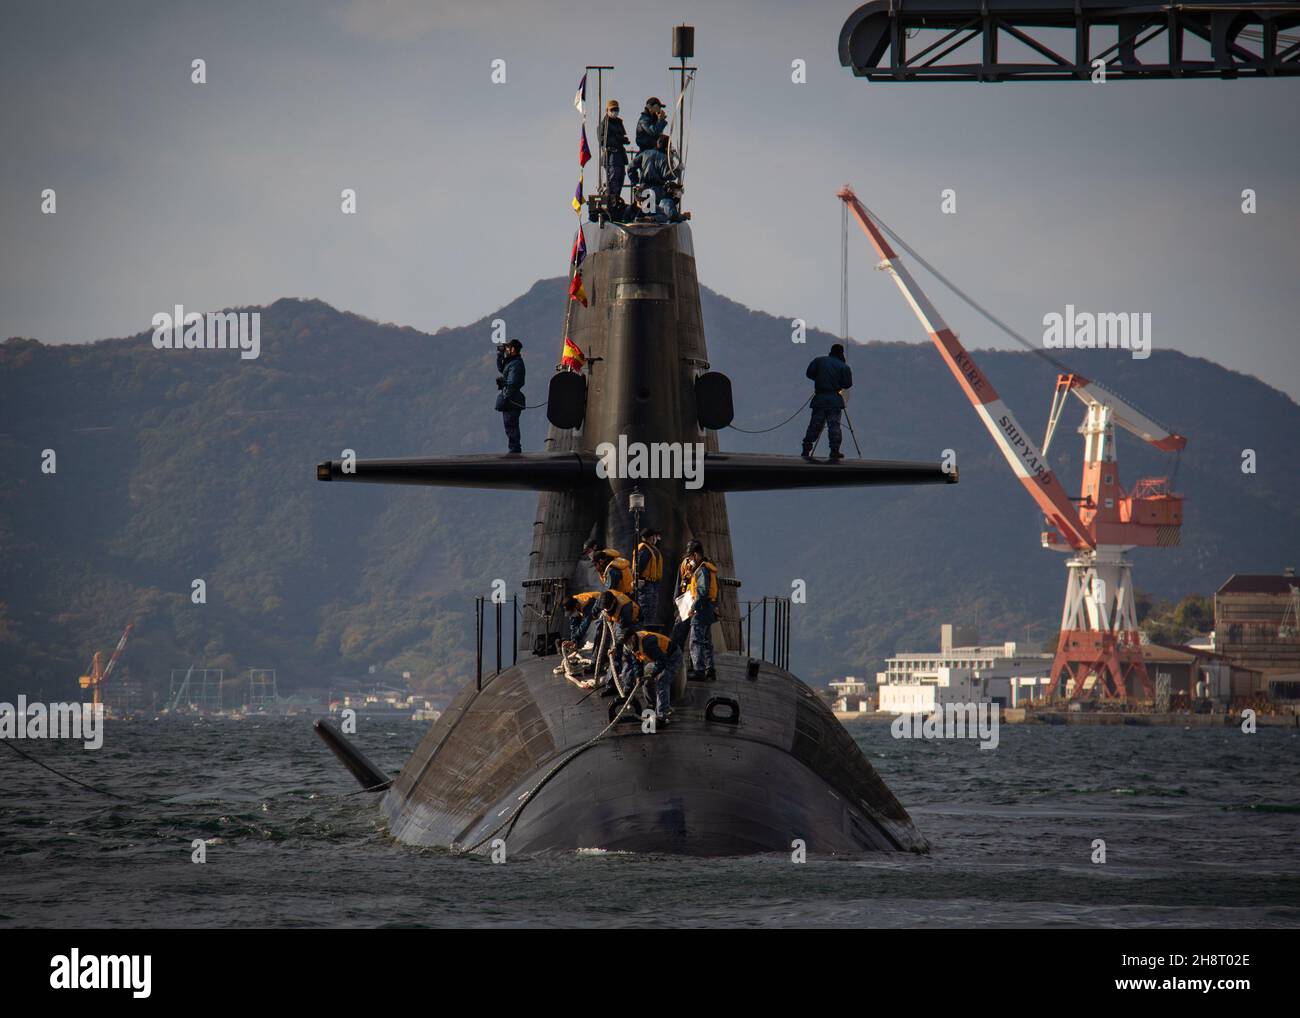 KURE, Japan (Nov. 25, 2021) The Soryu-class submarine JS Sekiryu (SS 508) departs from alongside the Emory S. Land-class submarine tender USS Frank Cable (AS 40) Nov. 25. Frank Cable is moored at the JMSDF Kure Naval Base, Japan, as part of their patrol conducting expeditionary maintenance and logistics in support of national security in the U.S. 7th Fleet area of operations.(U.S. Navy photo by Mass Communication Specialist 2nd Class Chase Stephens/Released) Stock Photo